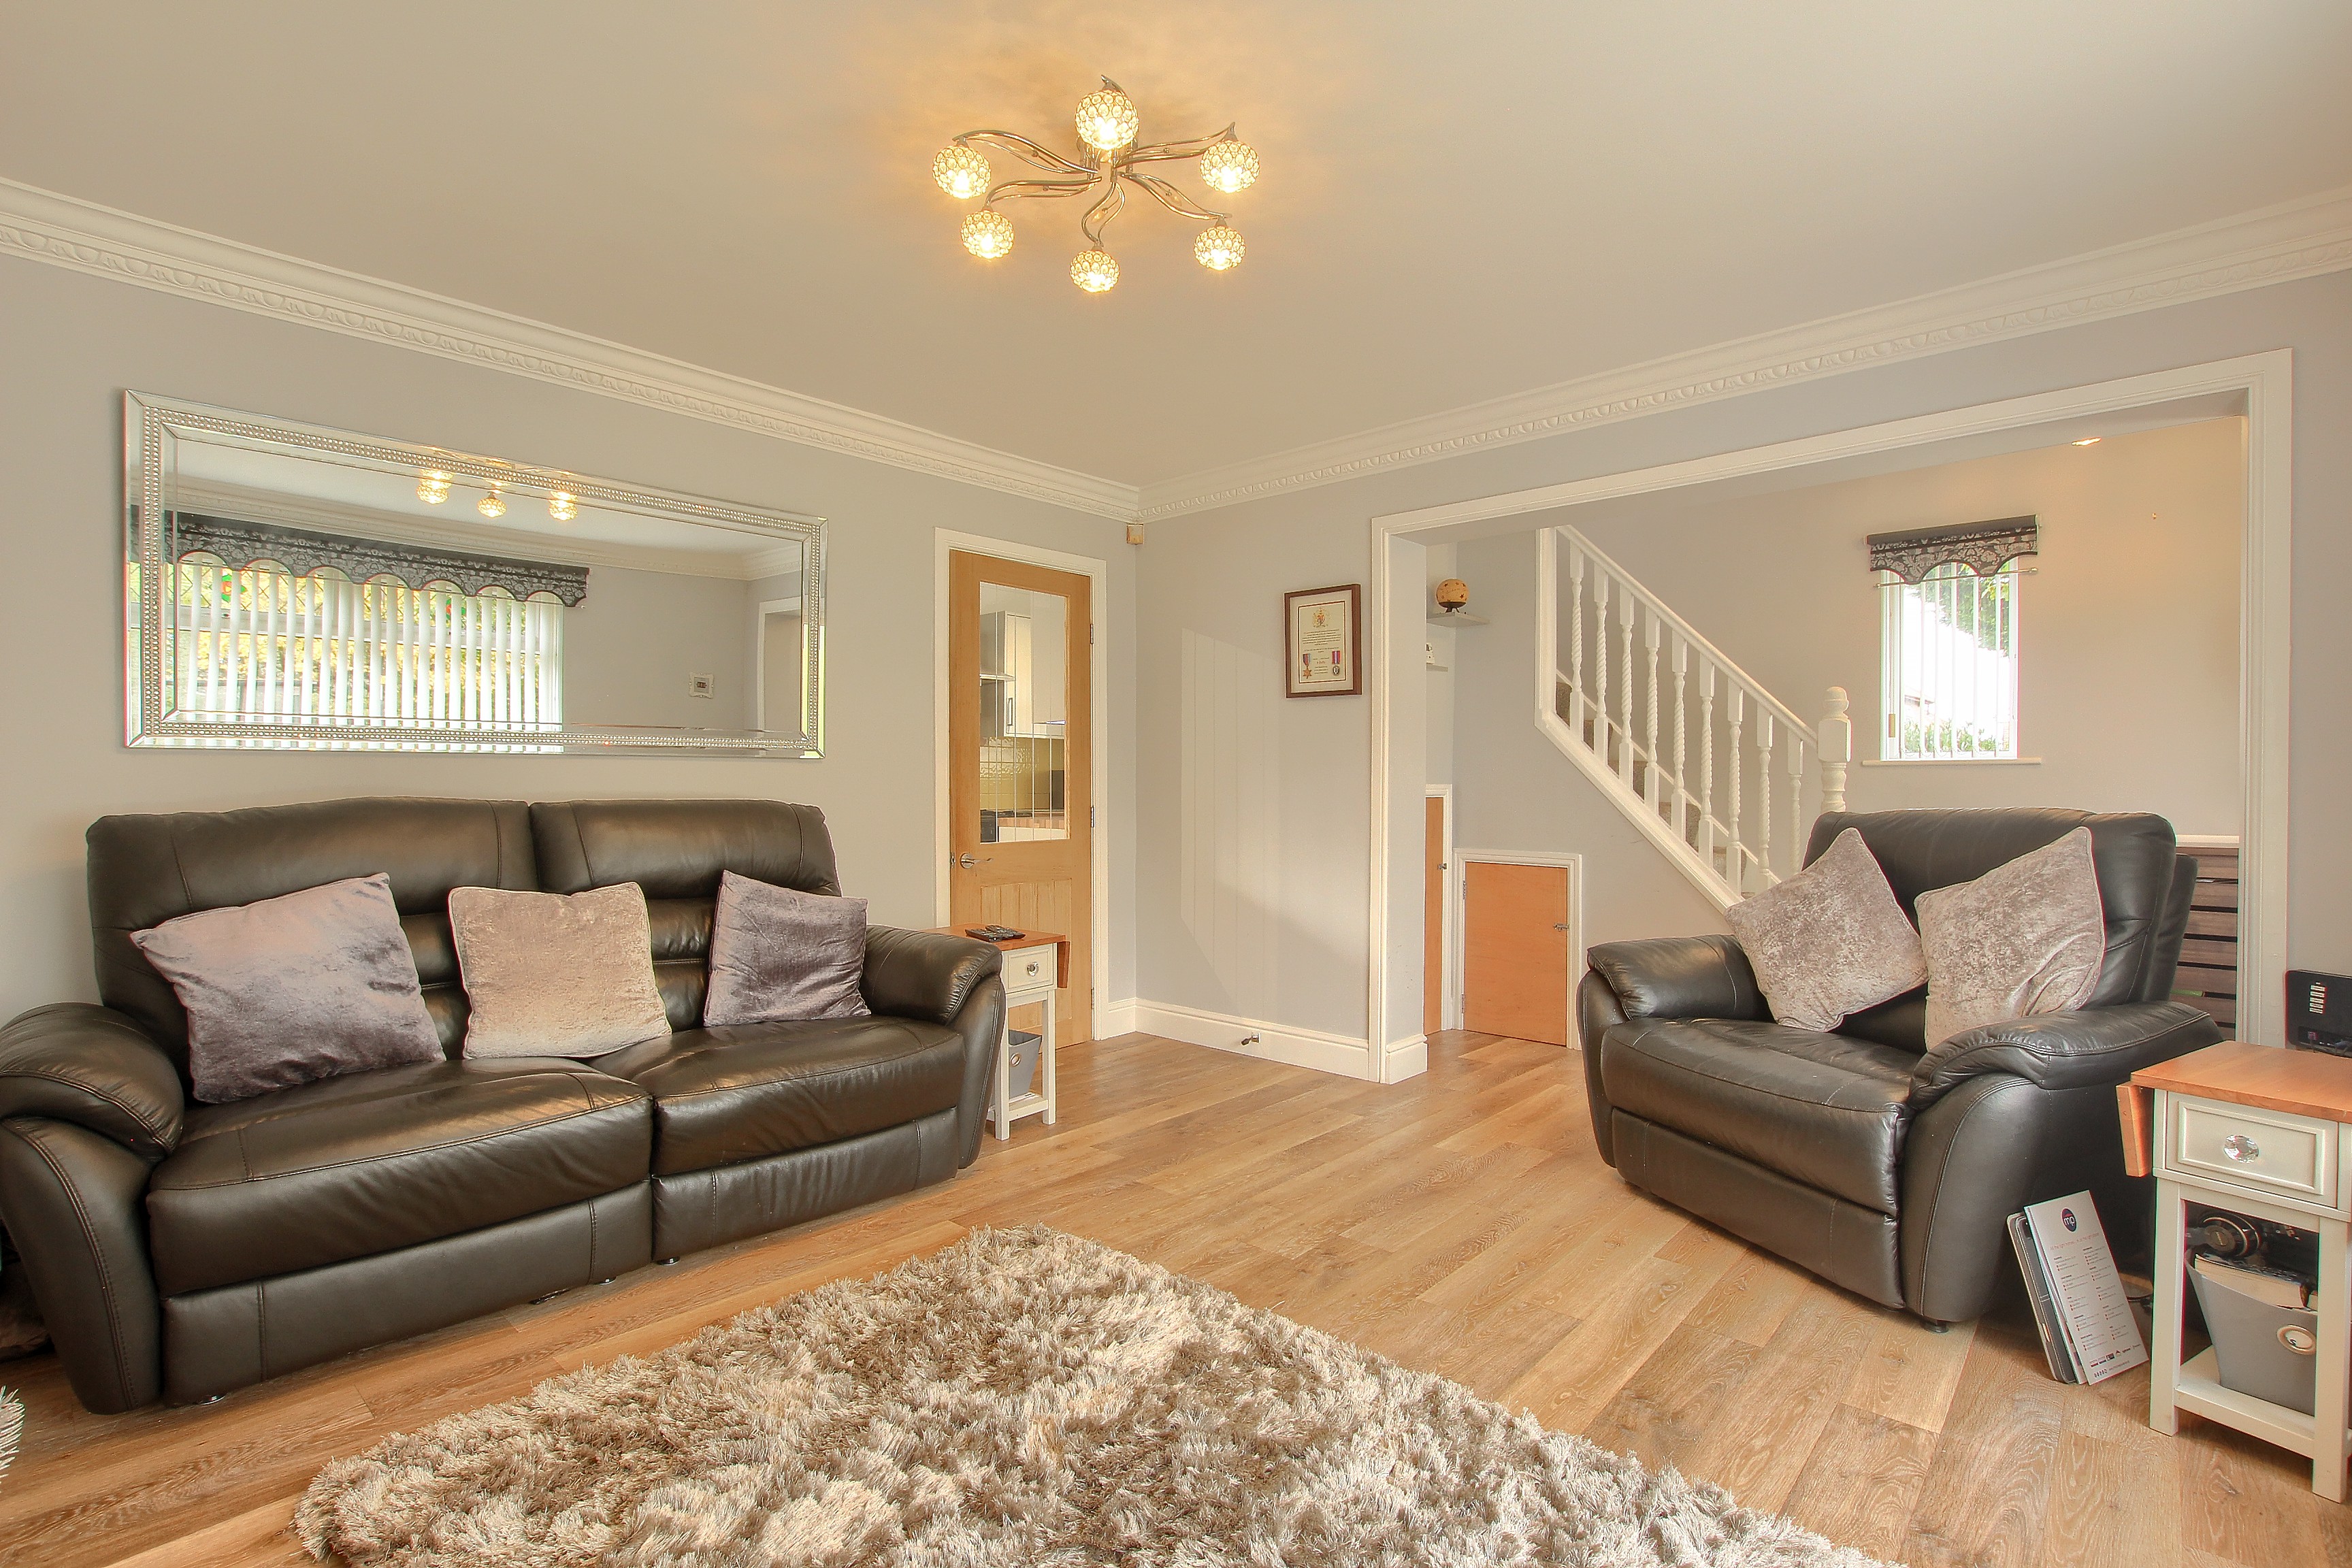 3 bed  for sale  - Property Image 2